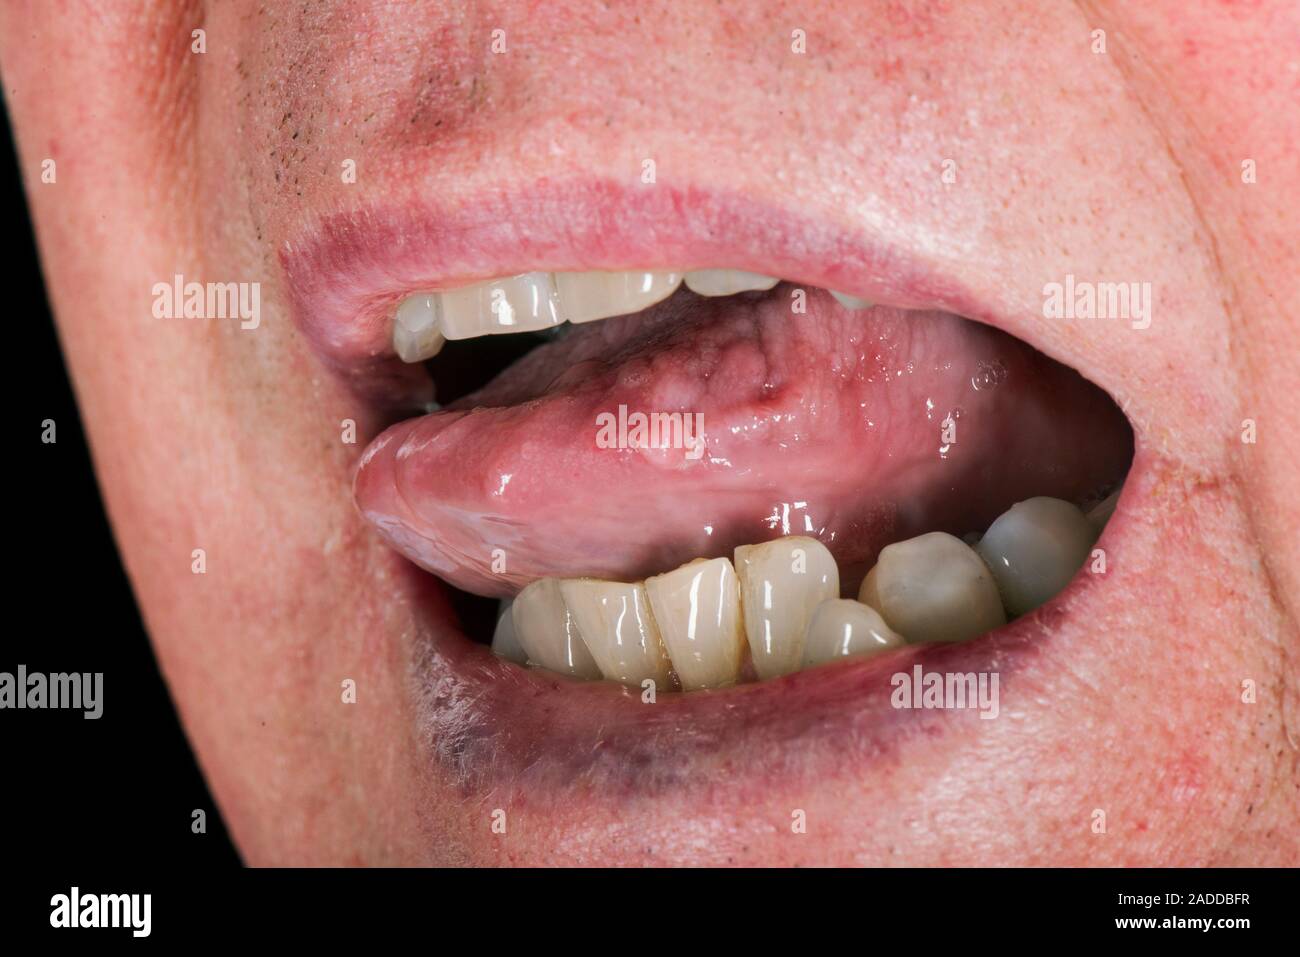 Tongue wart. Papilloma (wart) on the edge of the tongue of a 70-year-old man. This is a growth caused by the human papilloma virus (HPV). There are ov Stock Photo